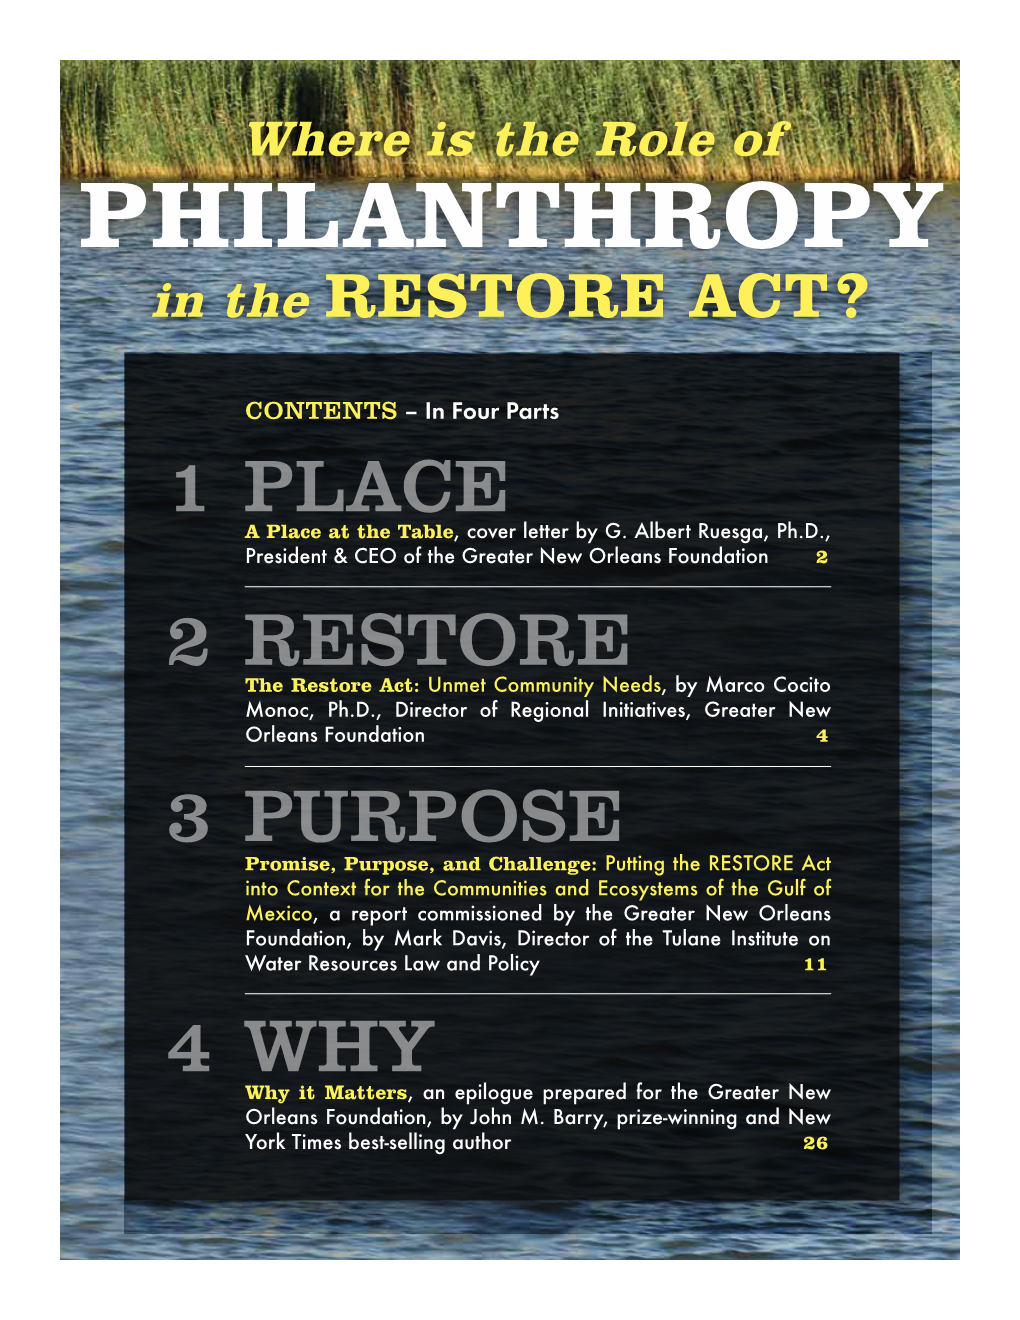 Where Is the Role of Philanthropy in the RESTORE Act?